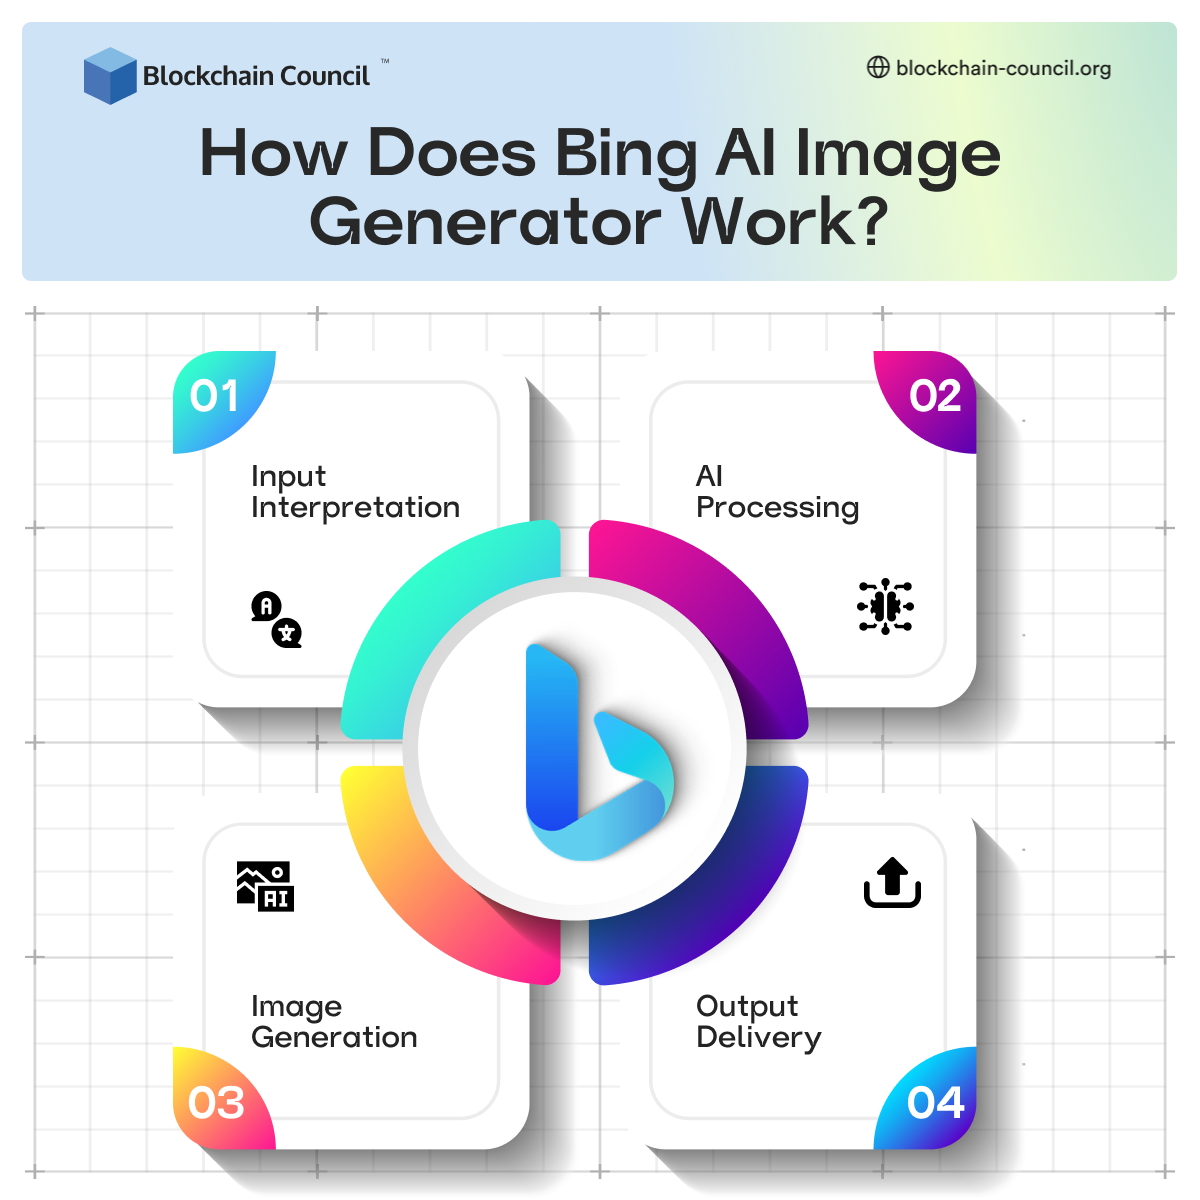 How Does Bing AI Image Generator Work?